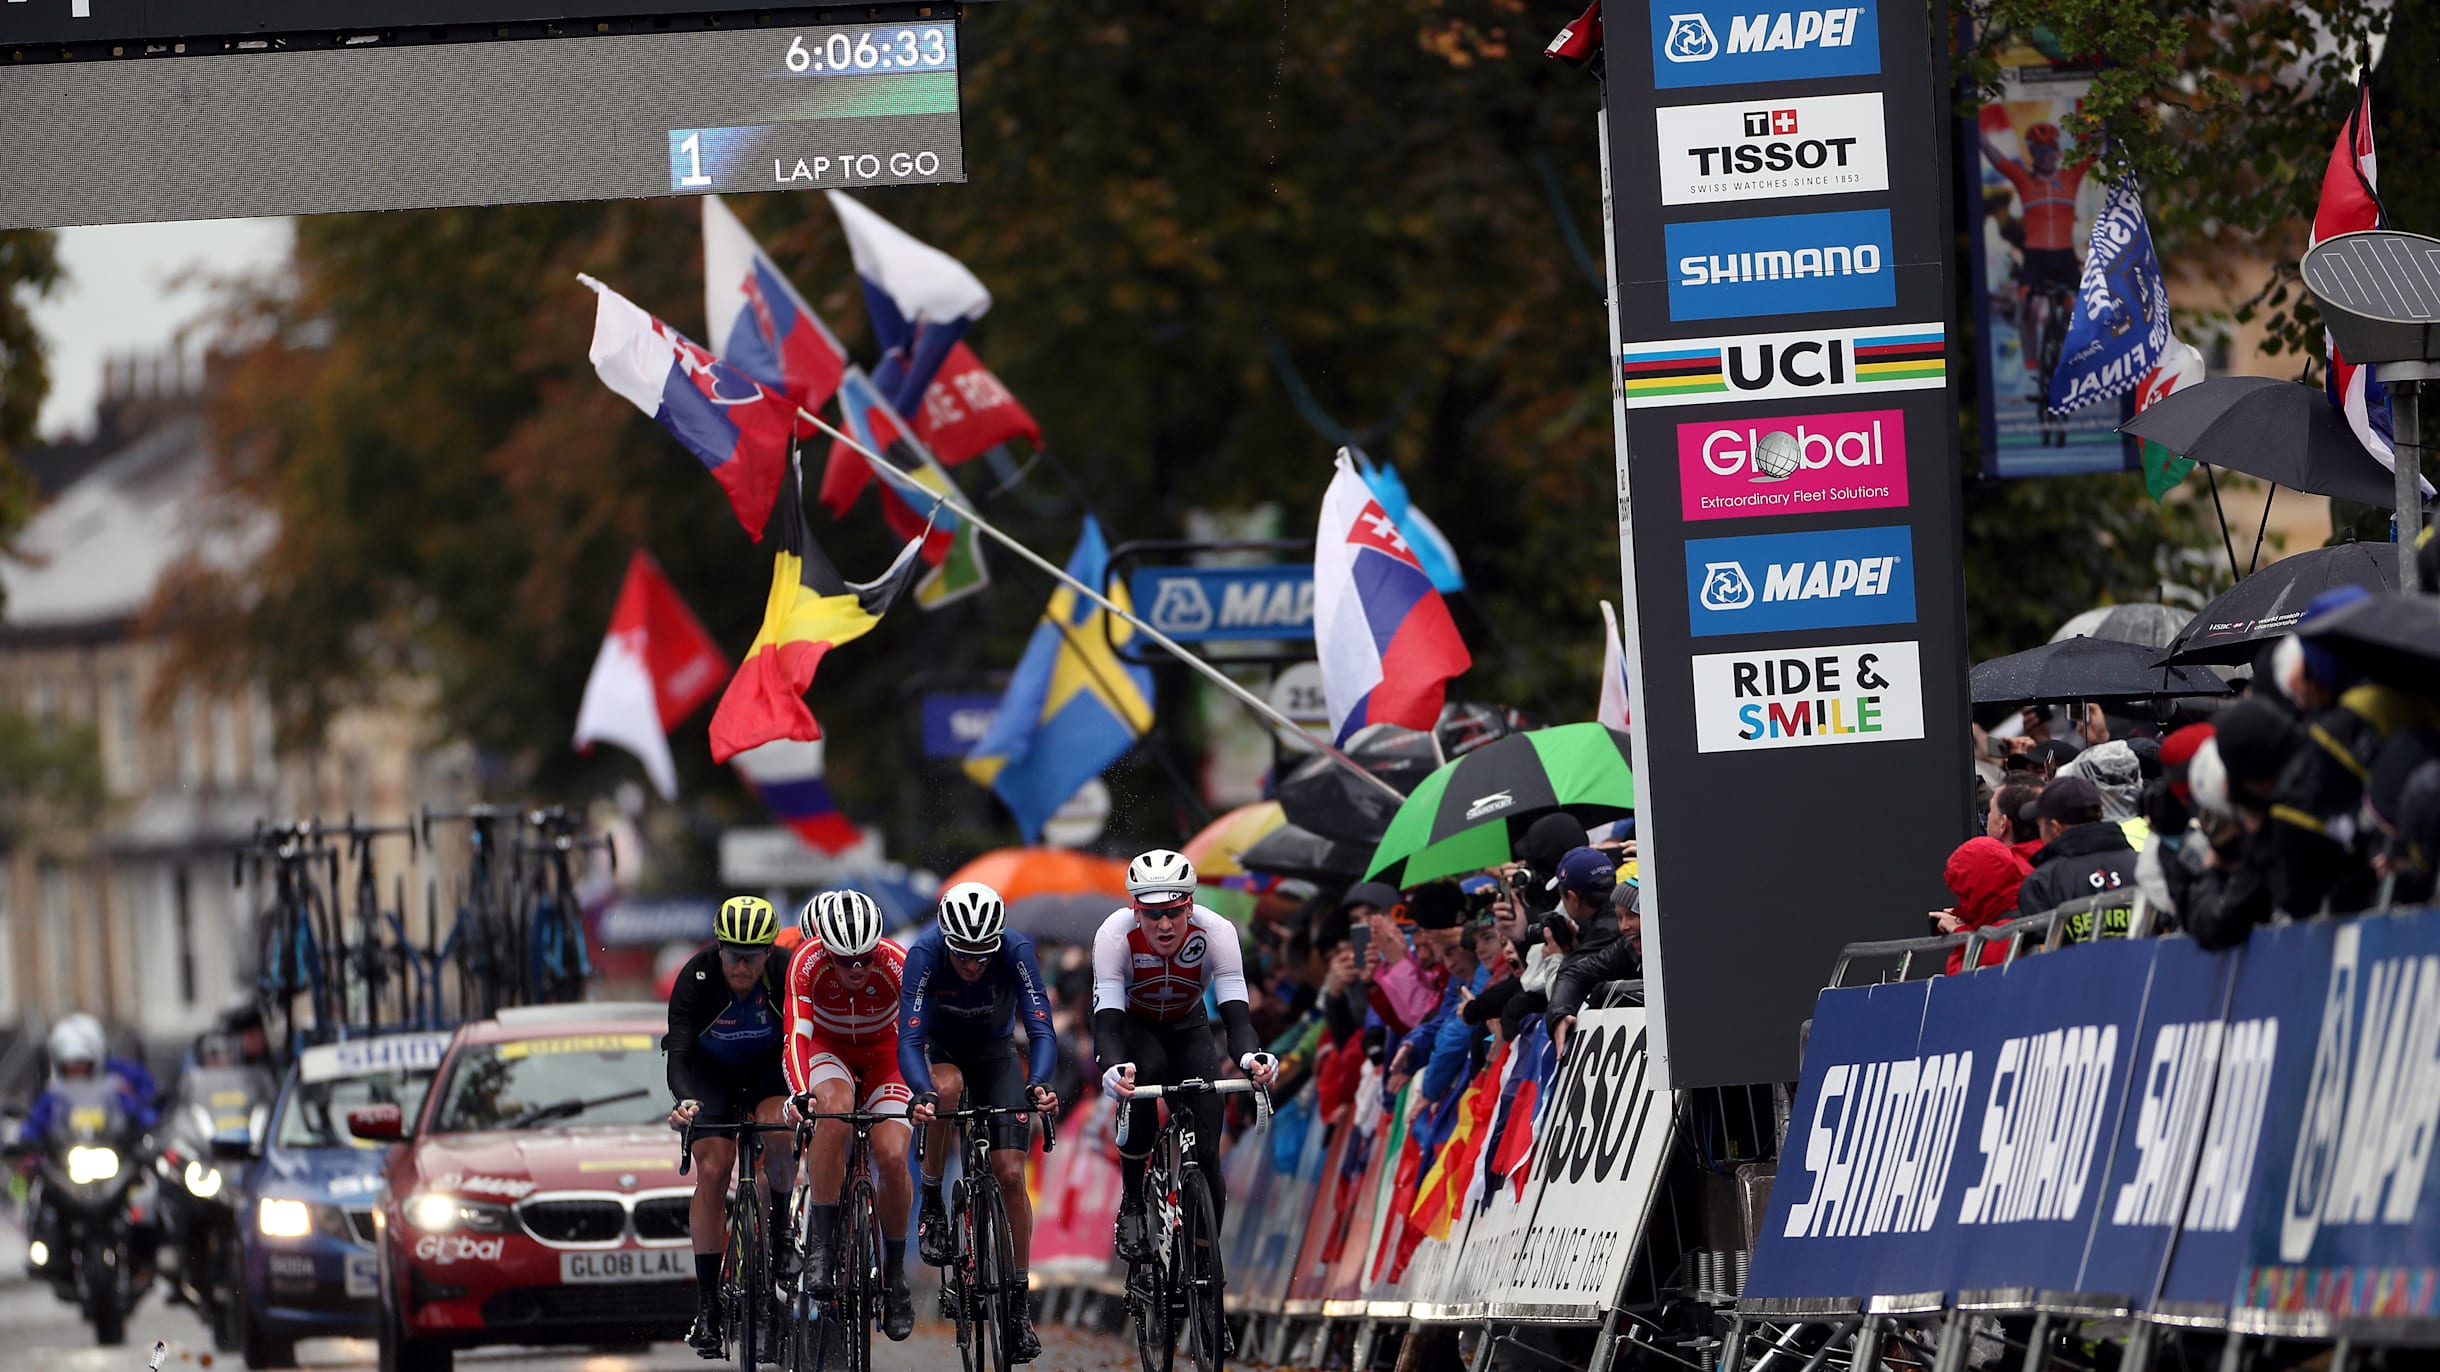 2020 Road Cycling Championships: Preview, schedule, and more